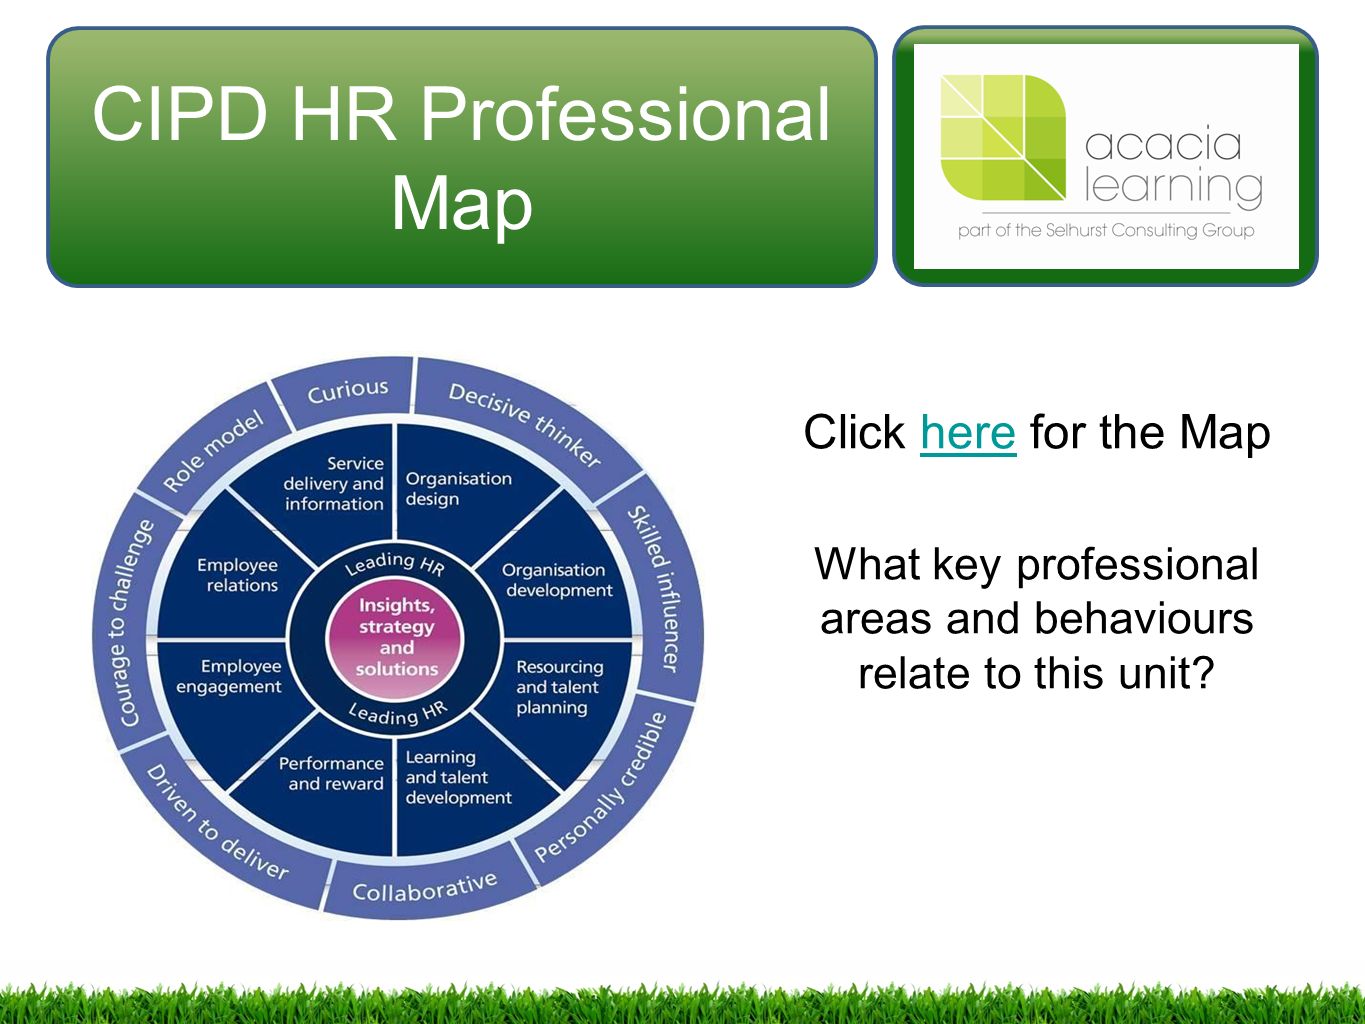 cipd resourcing and talent planning